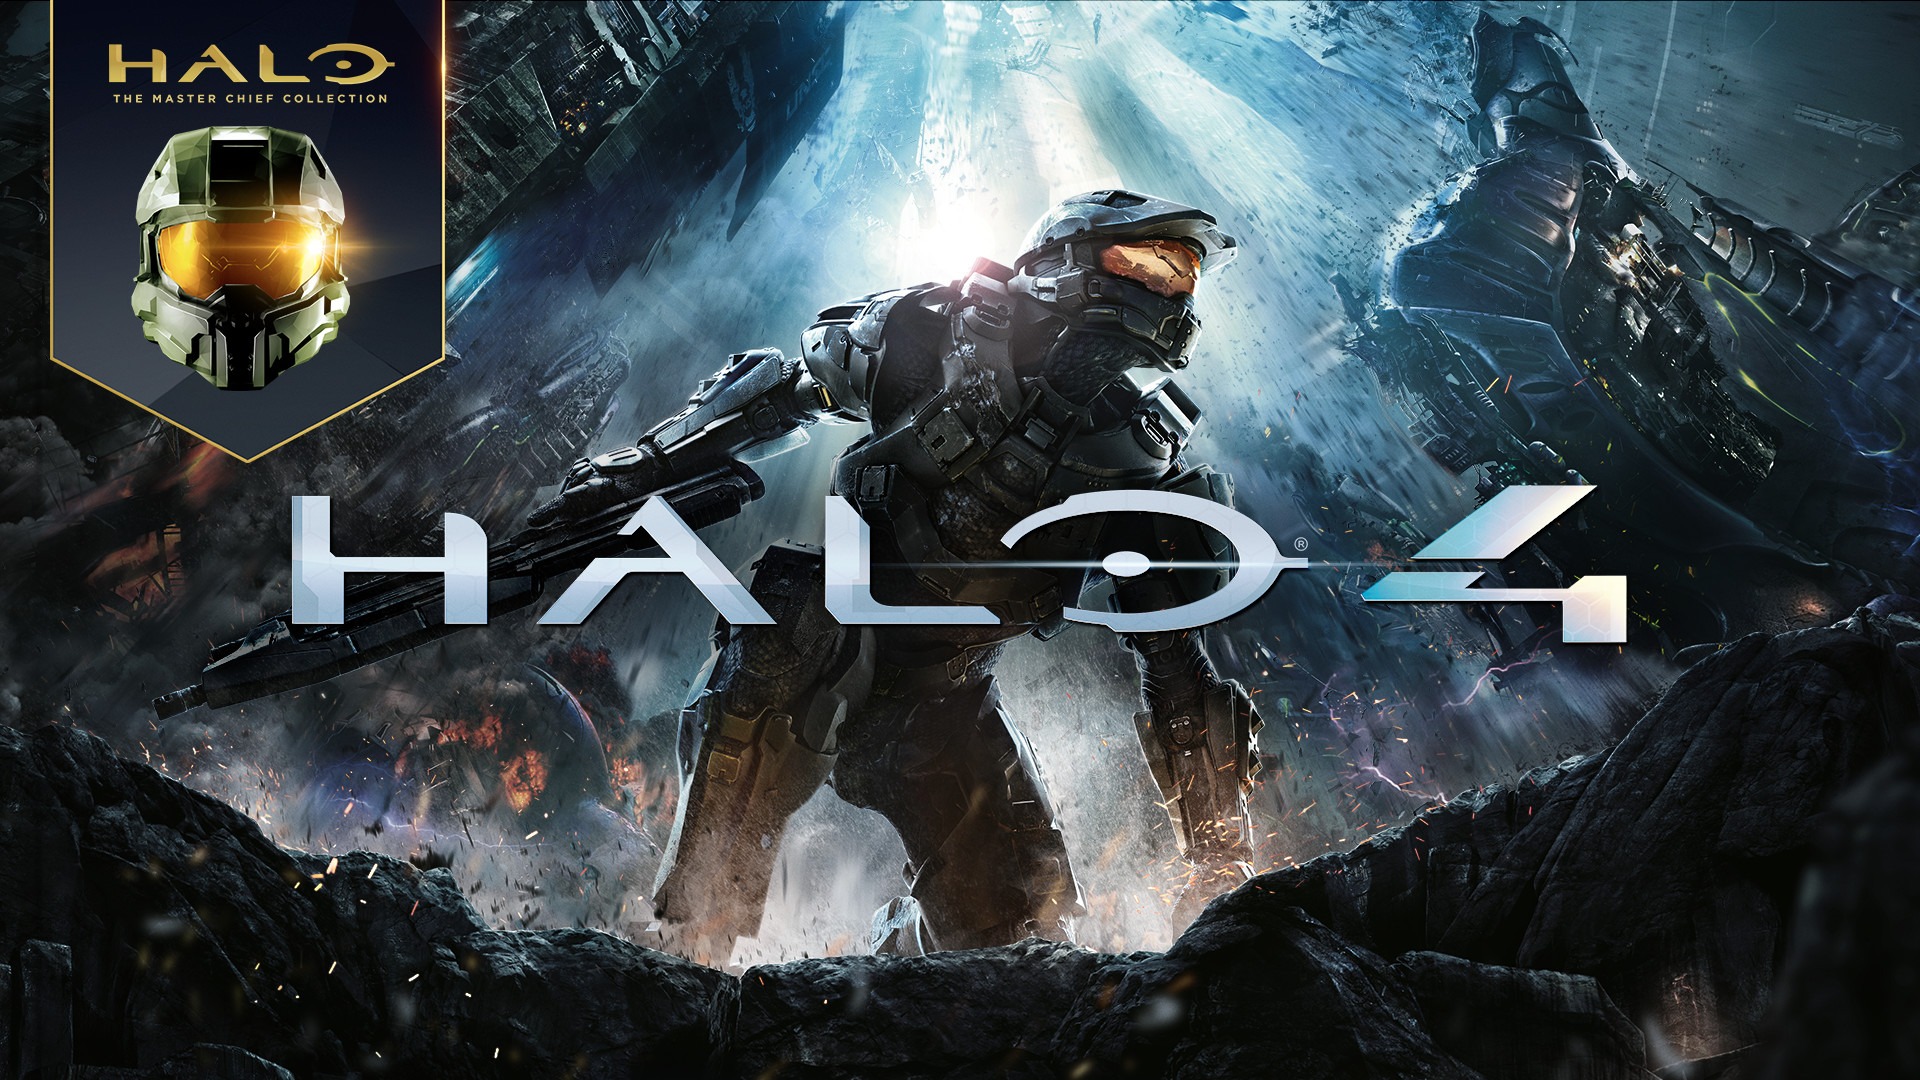 Halo 4-Halo The Master Chief Collection